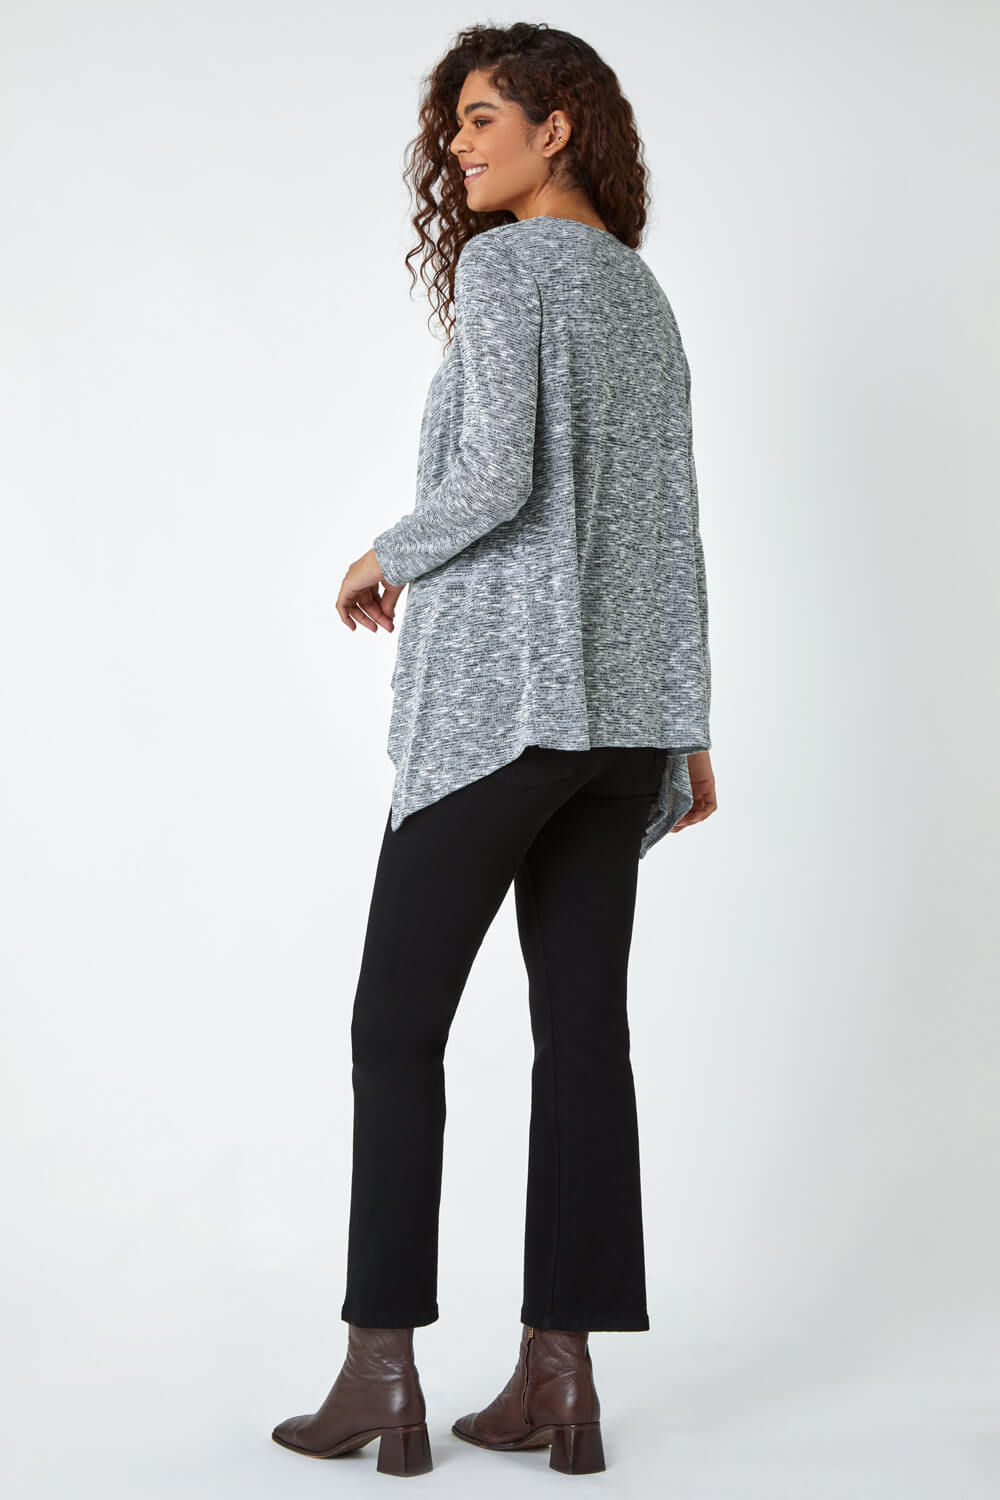 Grey Soft Knit Cardigan & Top, Image 3 of 5